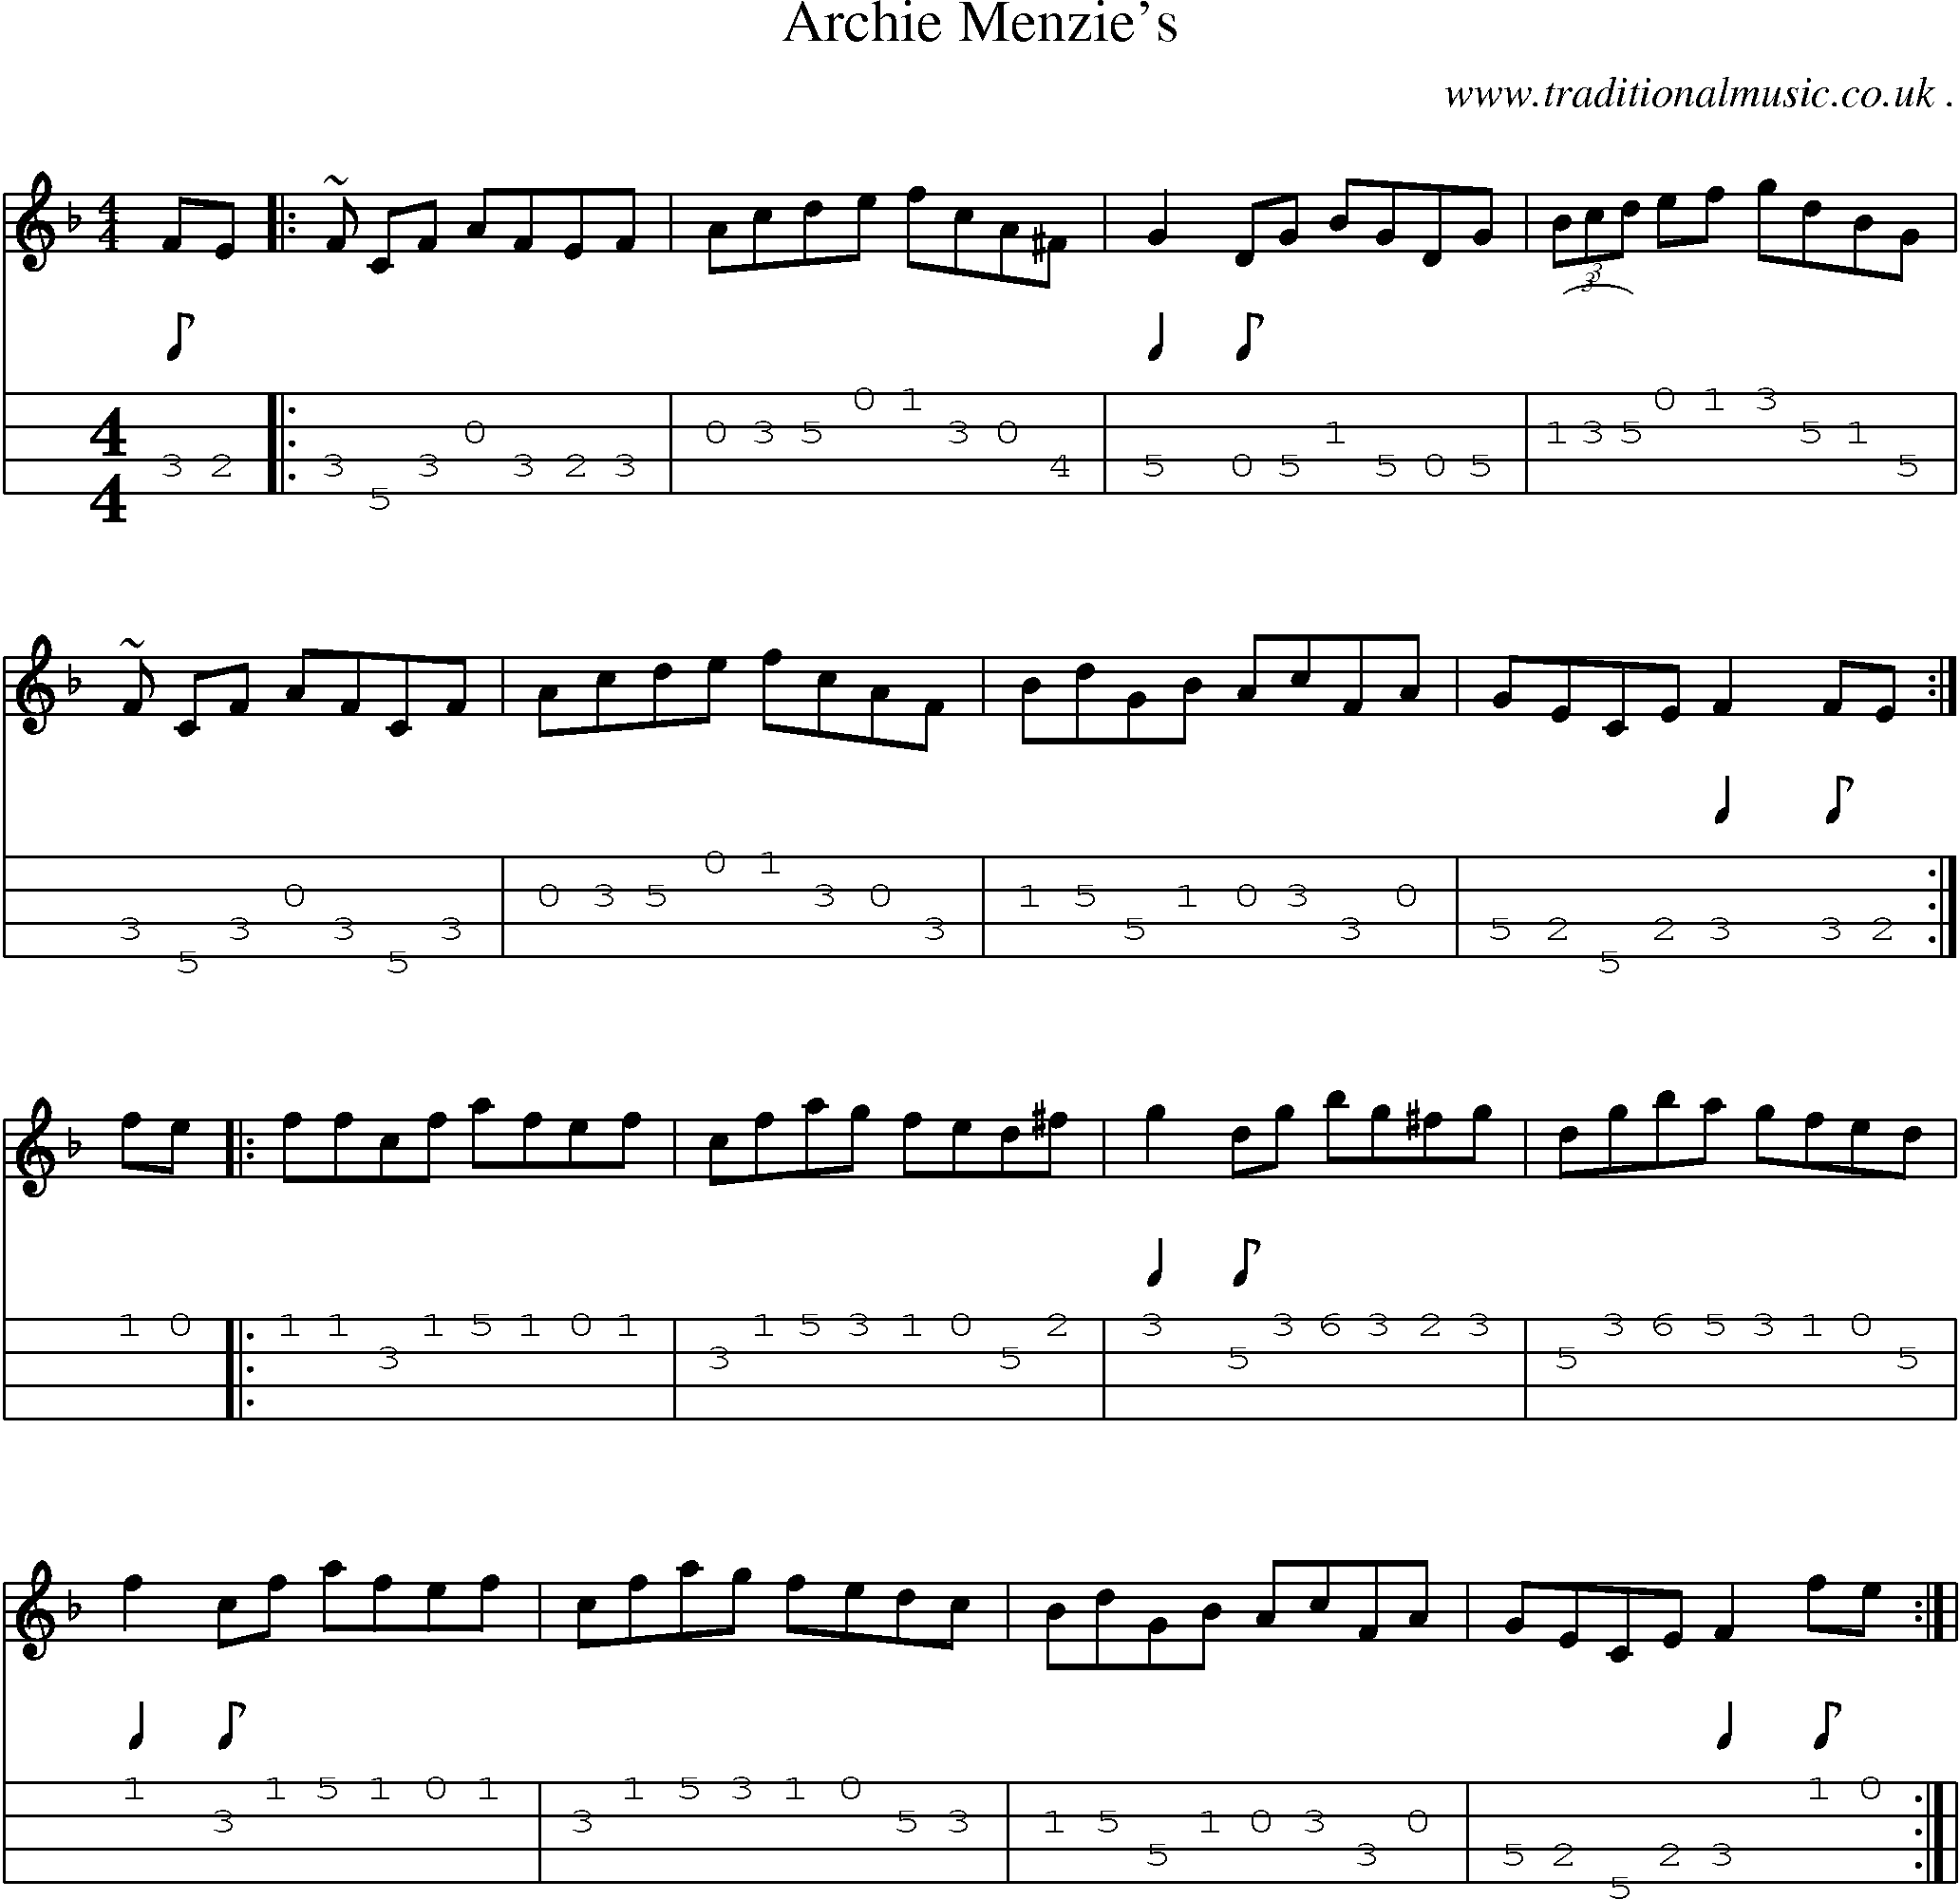 Music Score and Guitar Tabs for Archie Menzies